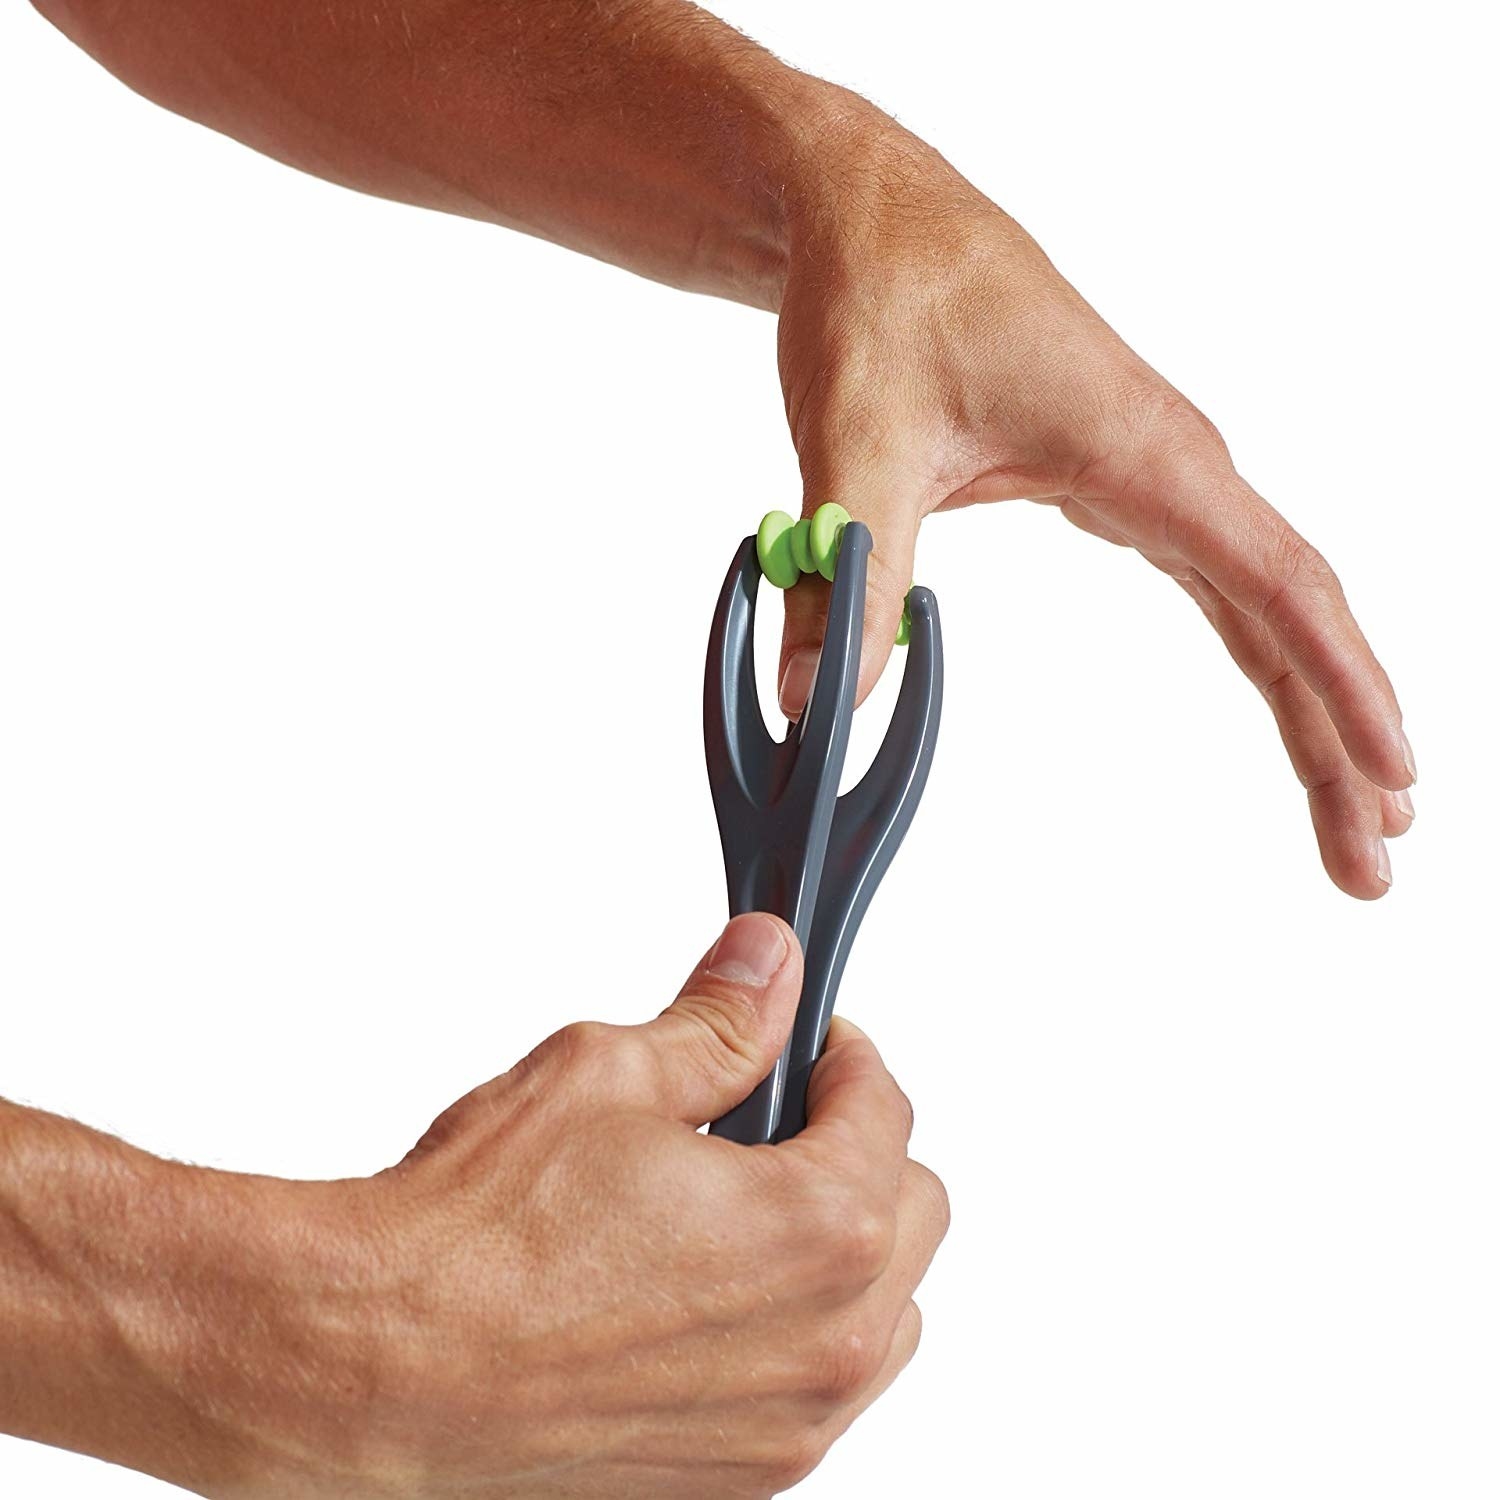 A person rolling the massager across their thumb